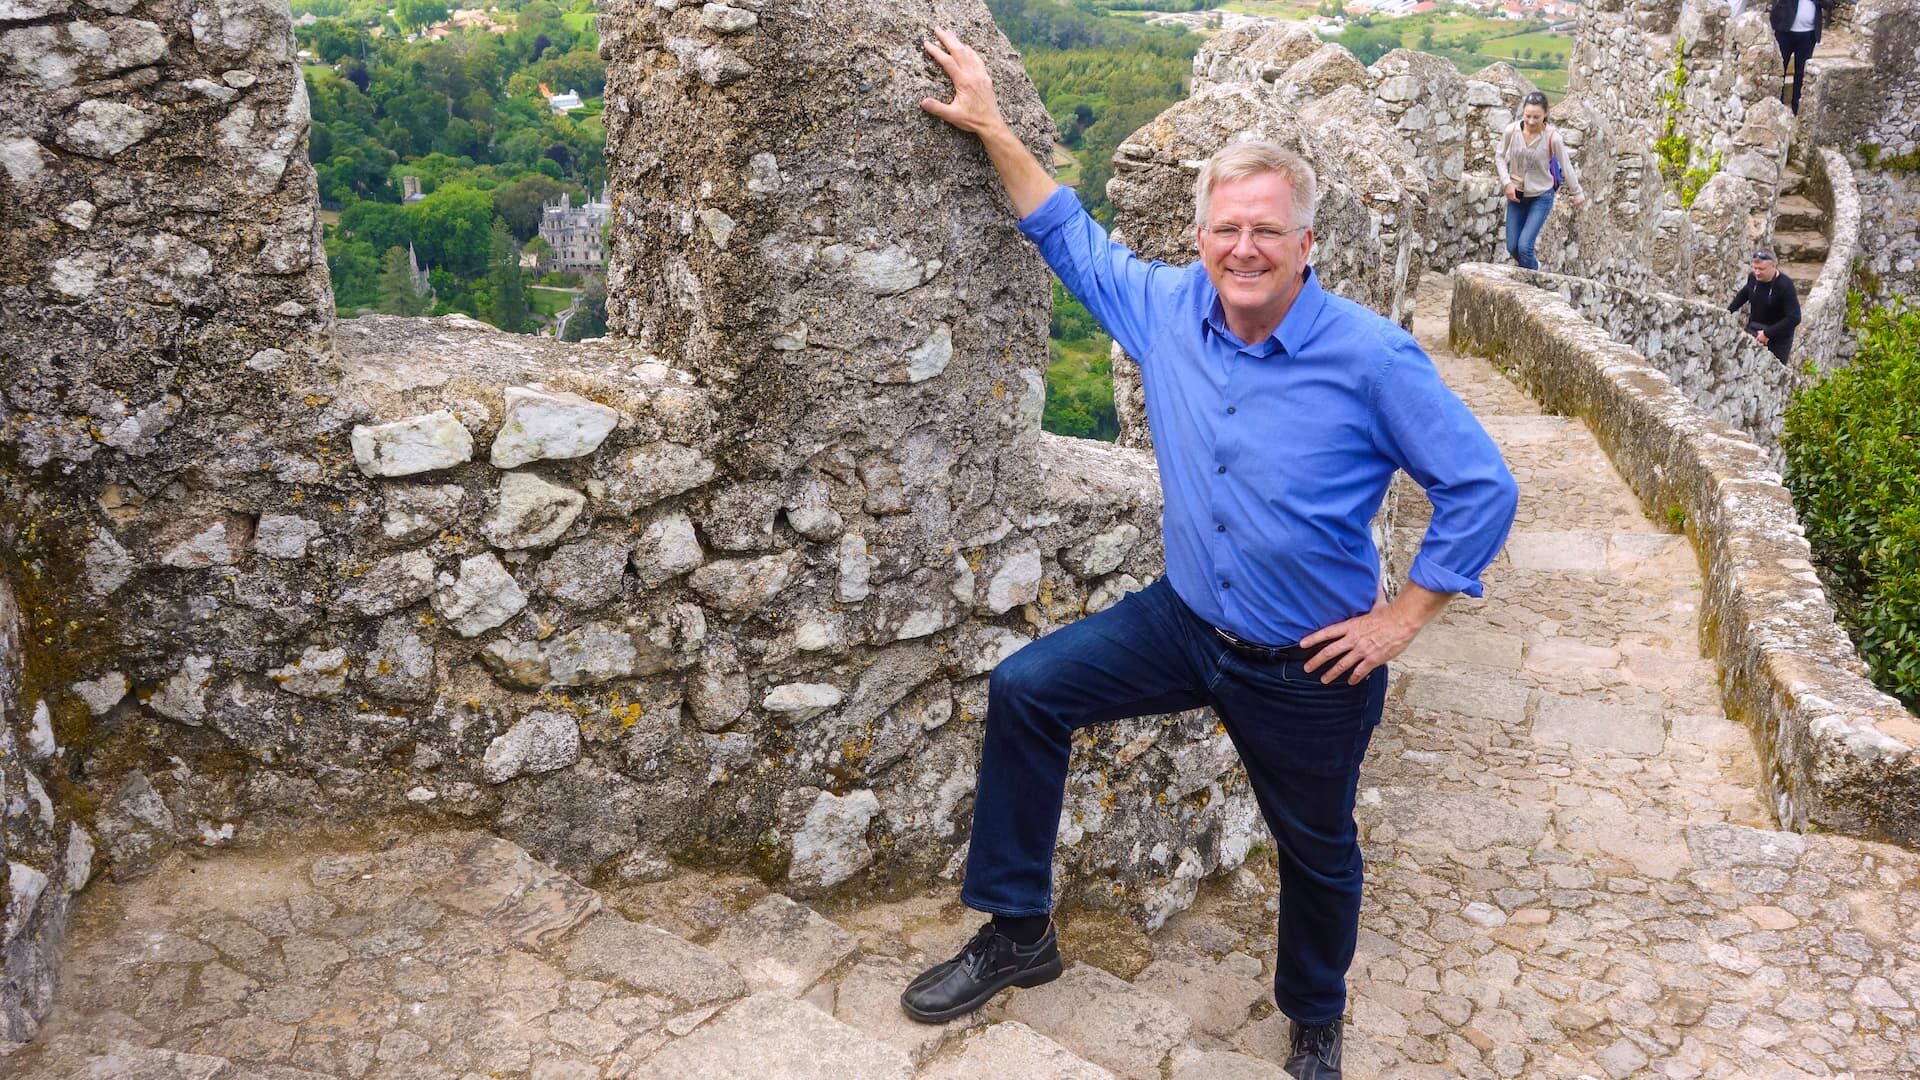 Join Us for Brunch with Rick Steves